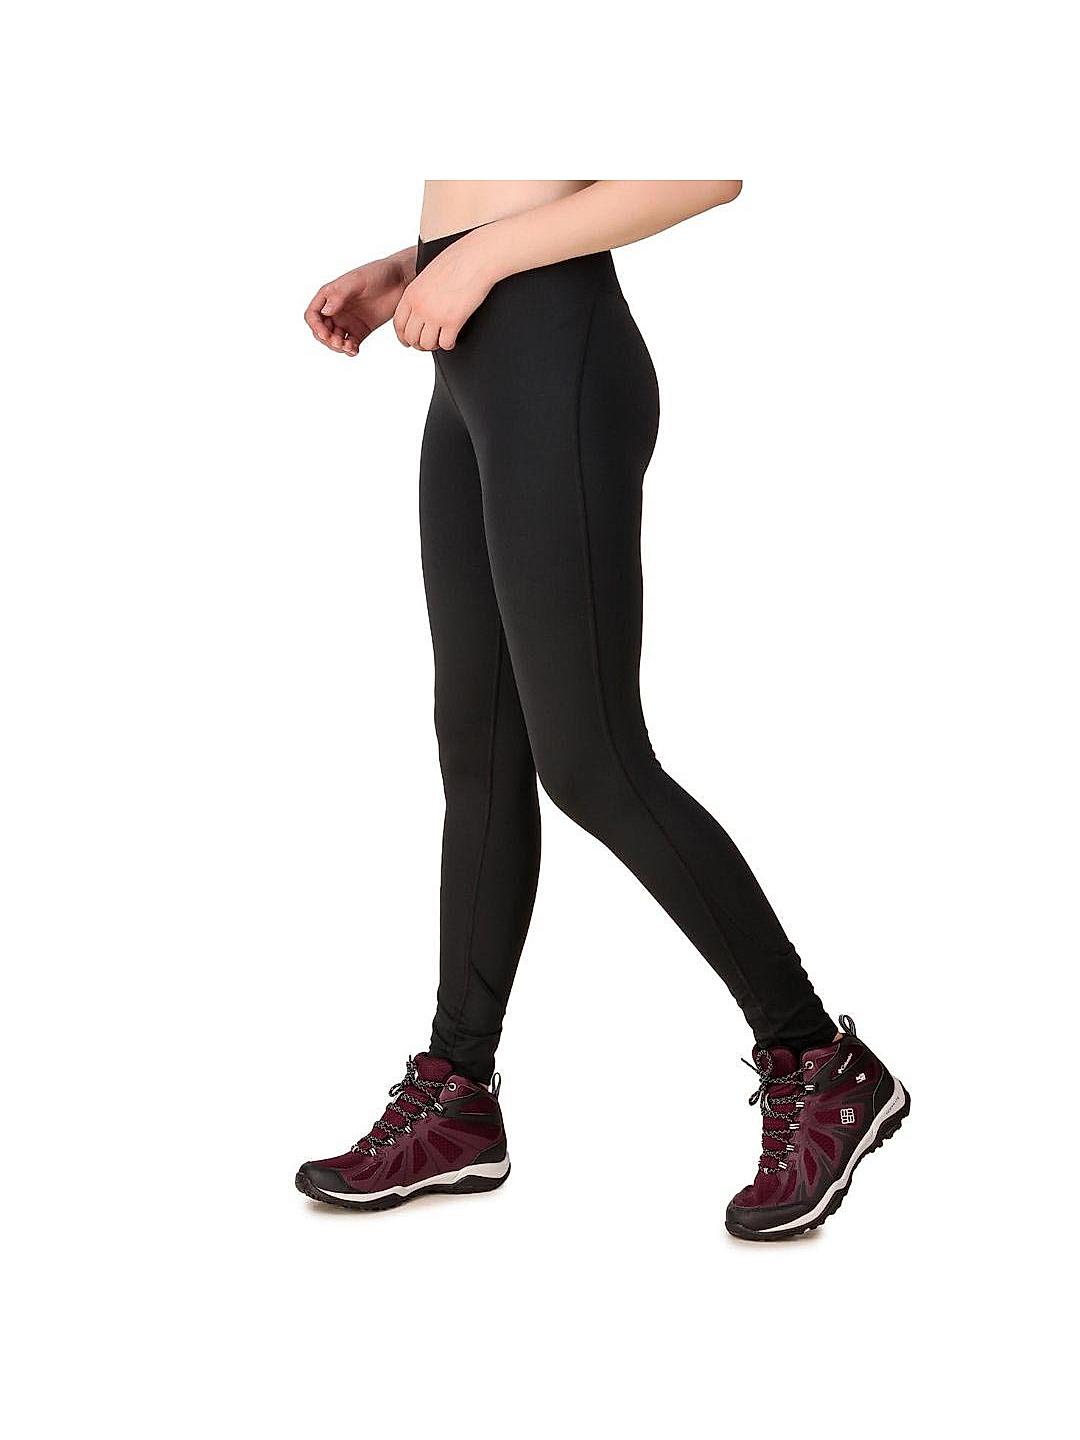 Buy Heavyweight II Tight for Men and Women Online at Columbia